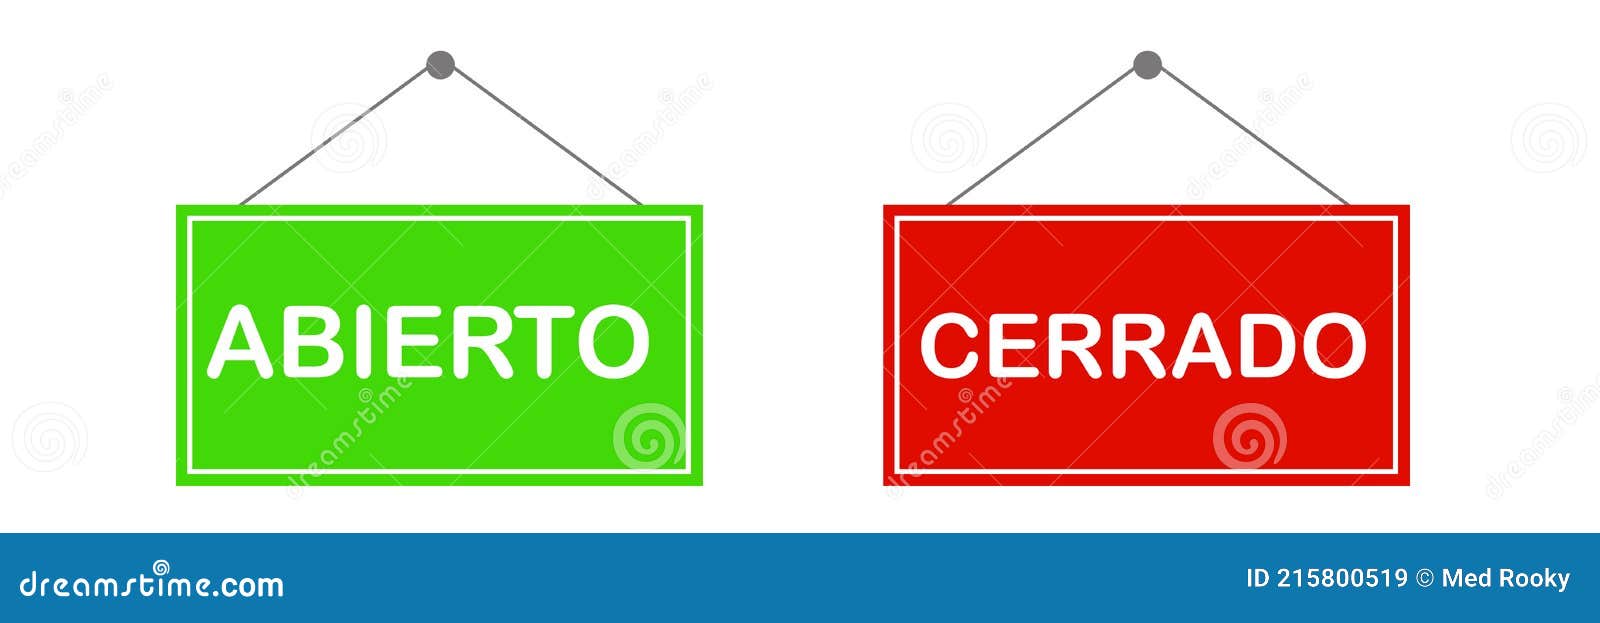 open and closed signs set,  spanish text